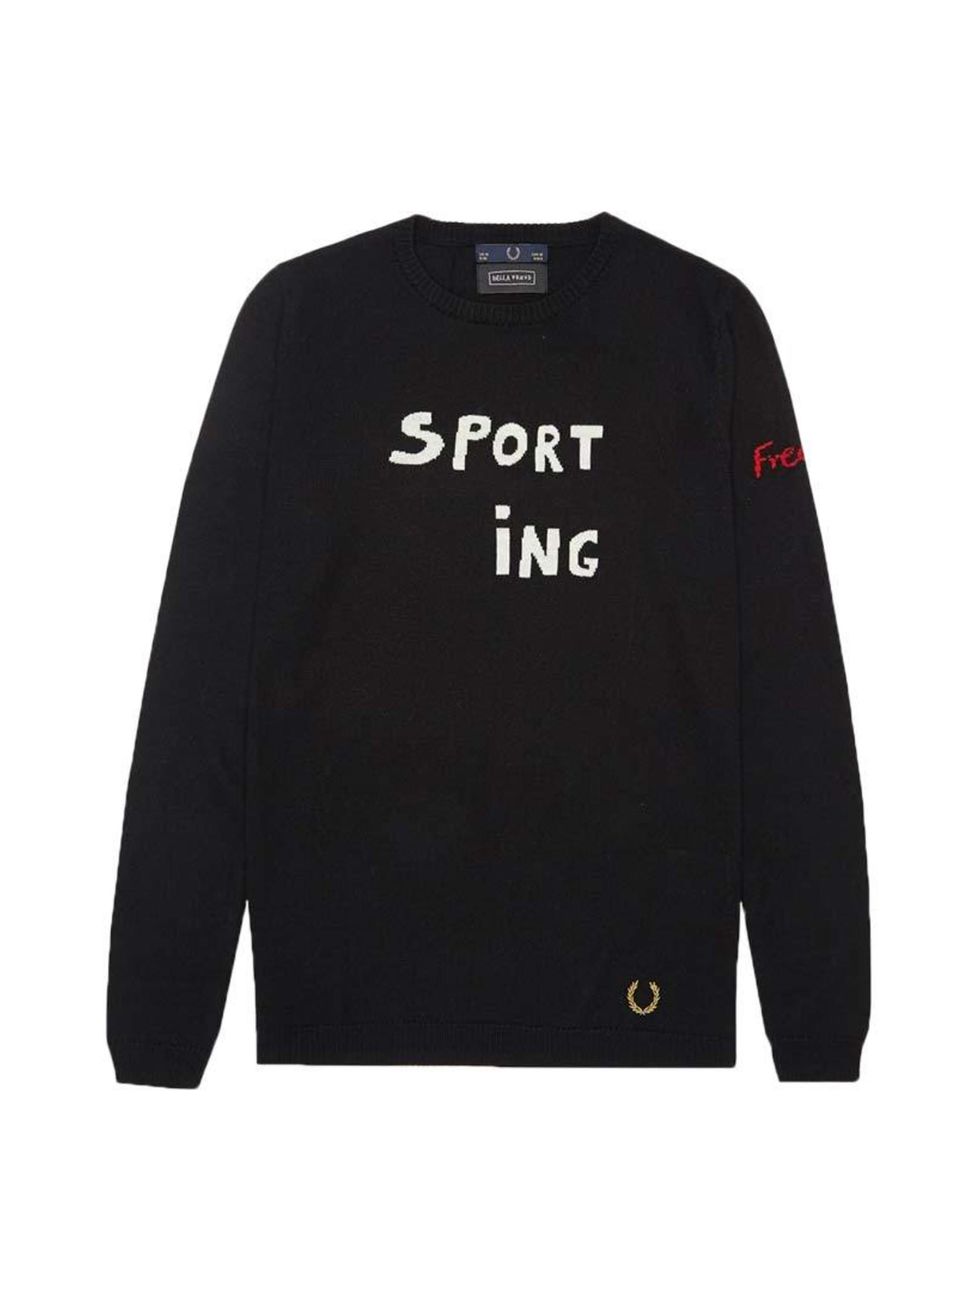 <p>Bella Freud's off-kilter slogans meet Fred Perry's iconic sporty silhouettes. We'll take it all.</p>

<p> </p>

<p><a href="http://www.fredperry.com/laurel-wreath-collection/women/bella-freud/bella-freud-sporting-fred-sweater-sk5291.html" target="_blan